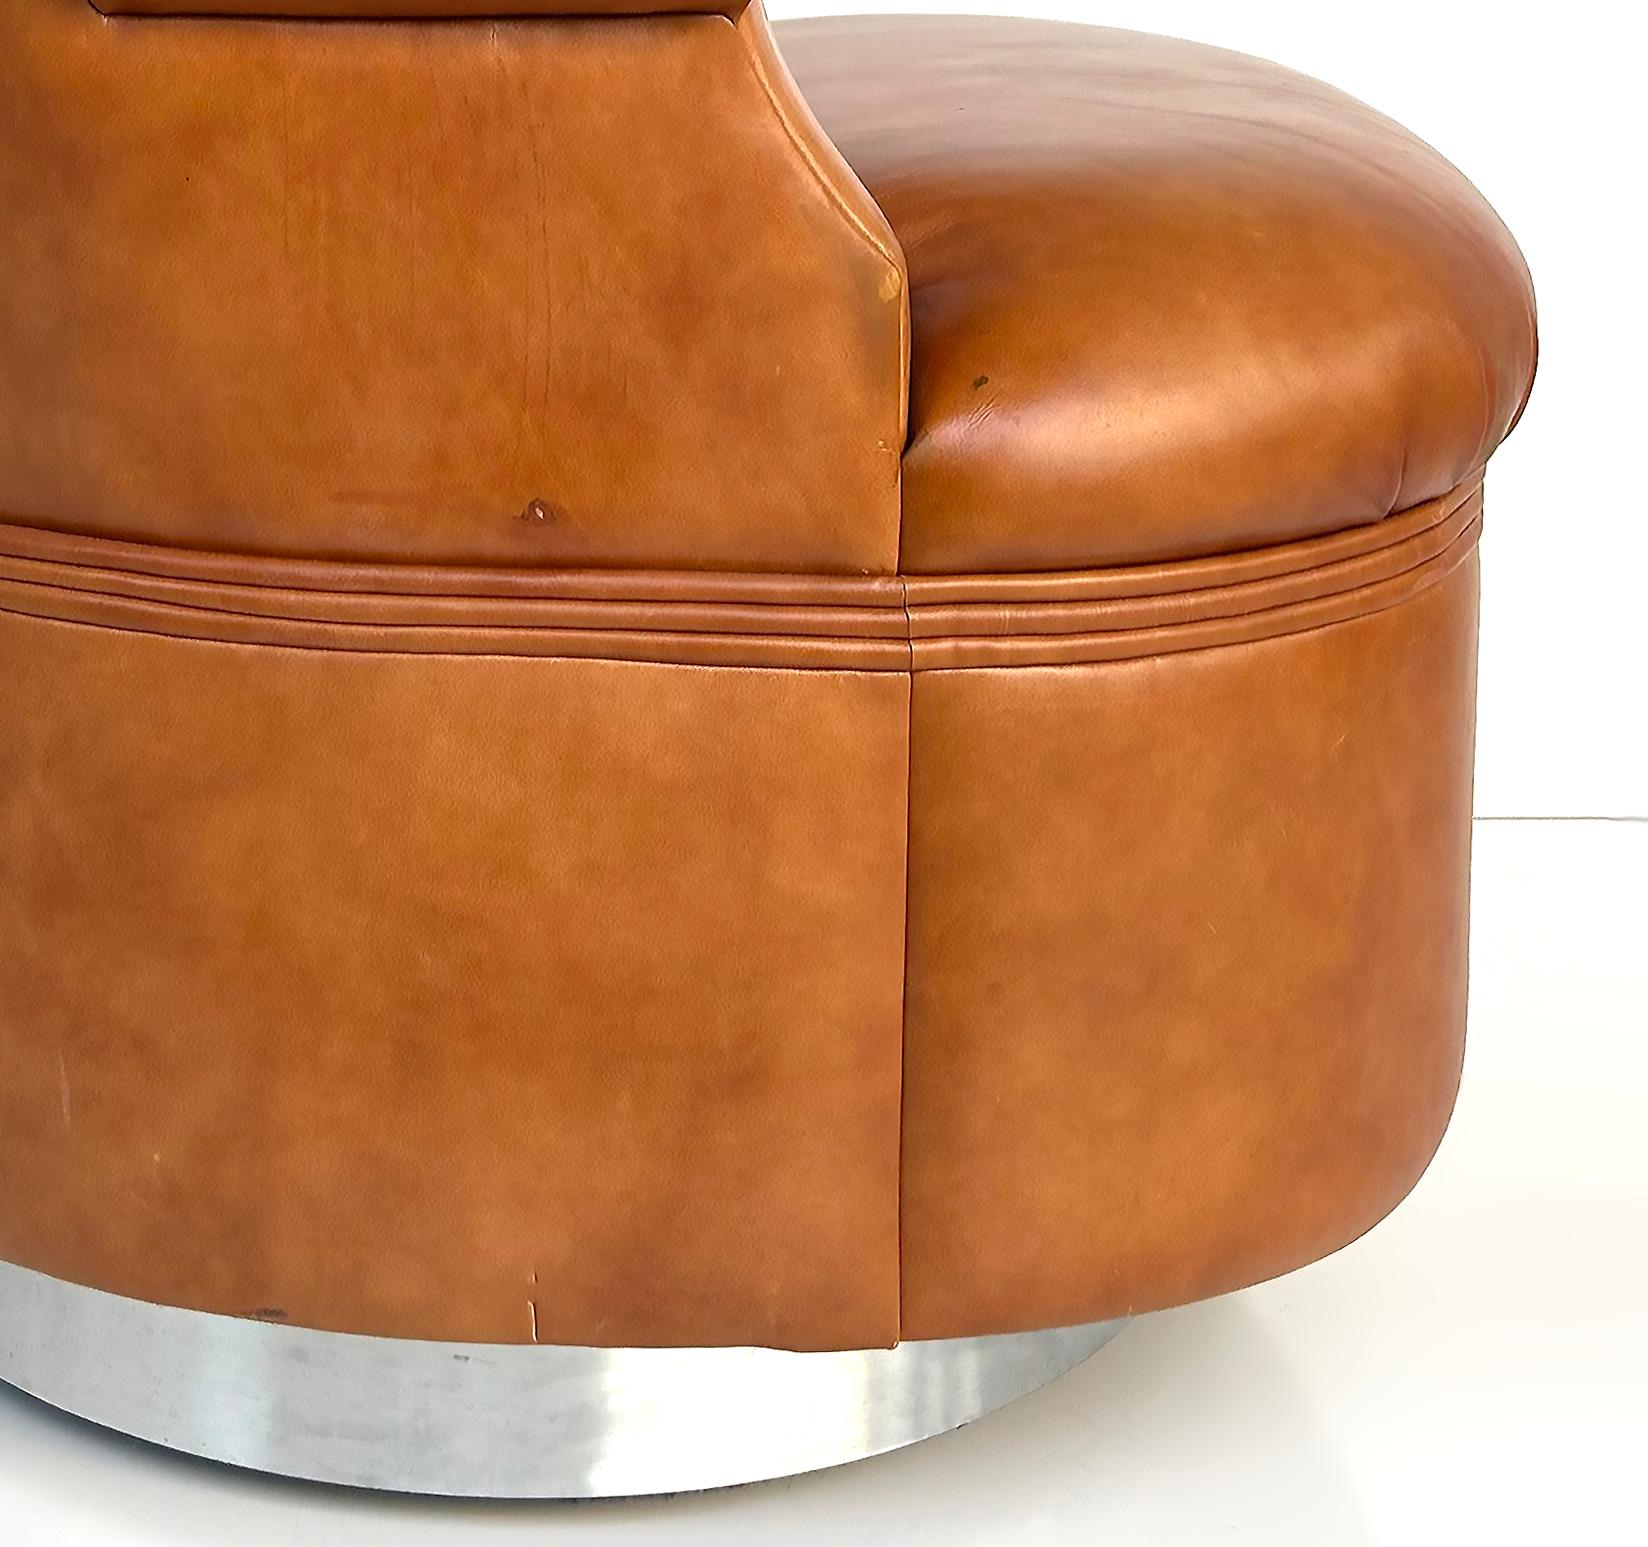  Steve Chase Martin Brattrud Chrome Leather Swivel Chairs on Casters- A Pair For Sale 7